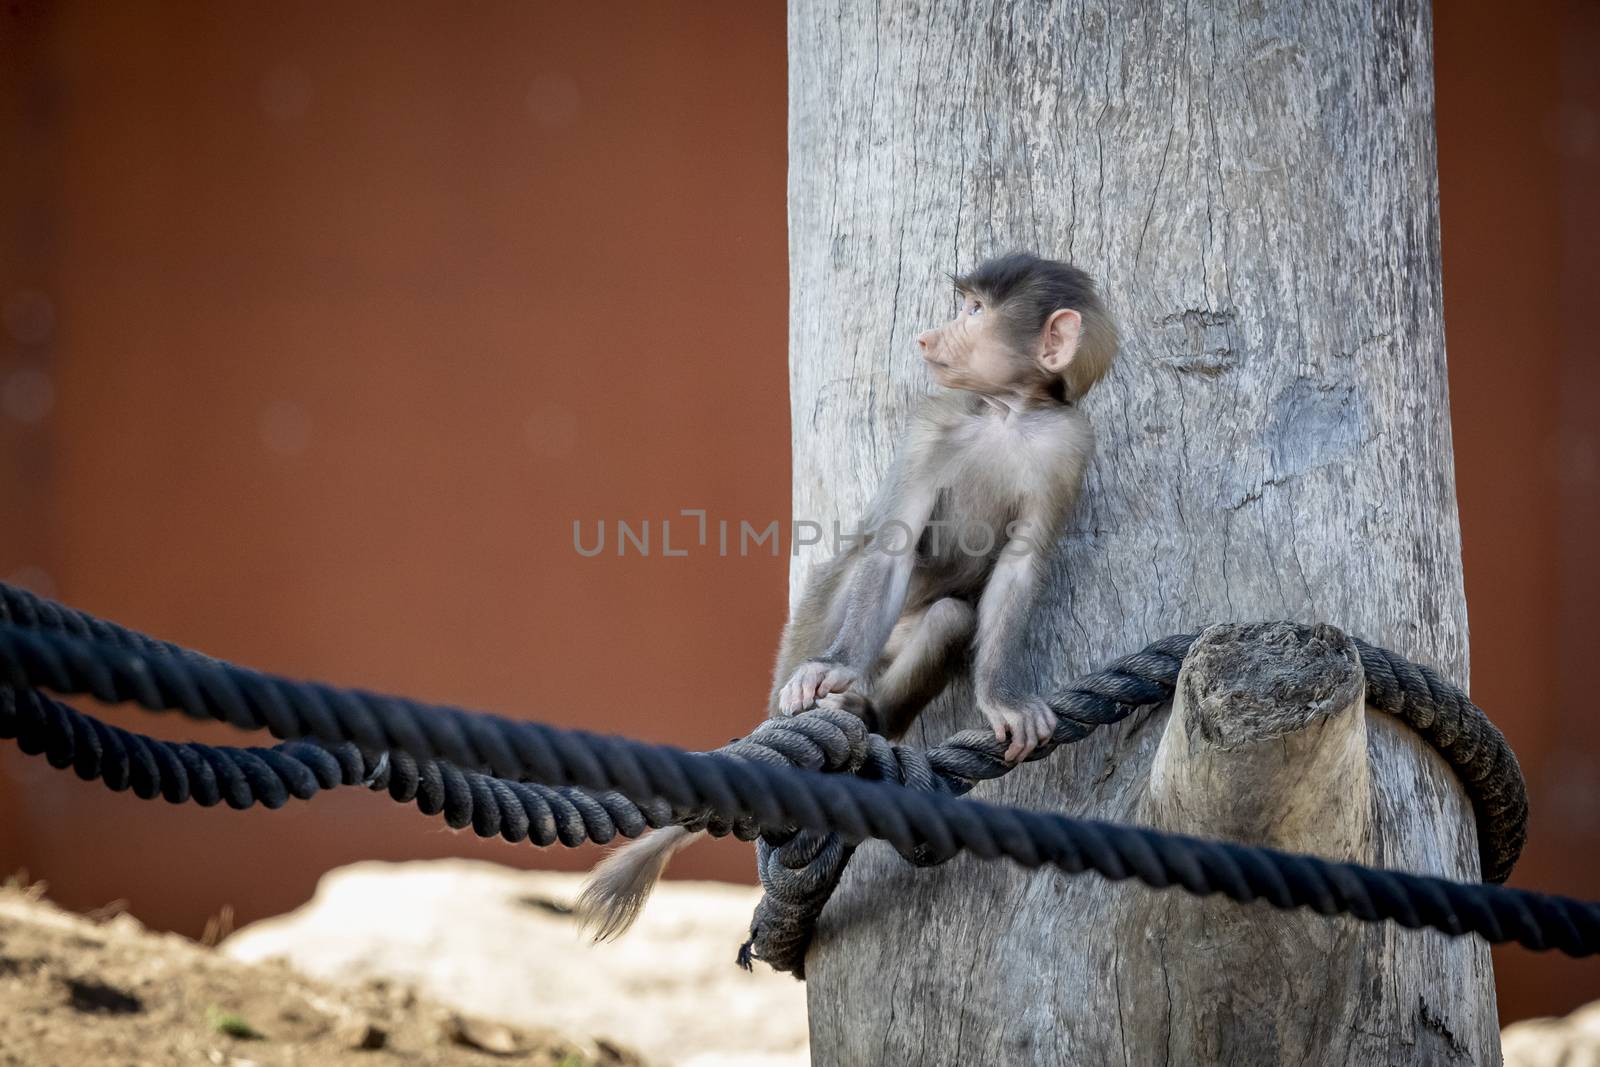 A baby Hamadryas Baboon playing on a wooden structure by WittkePhotos